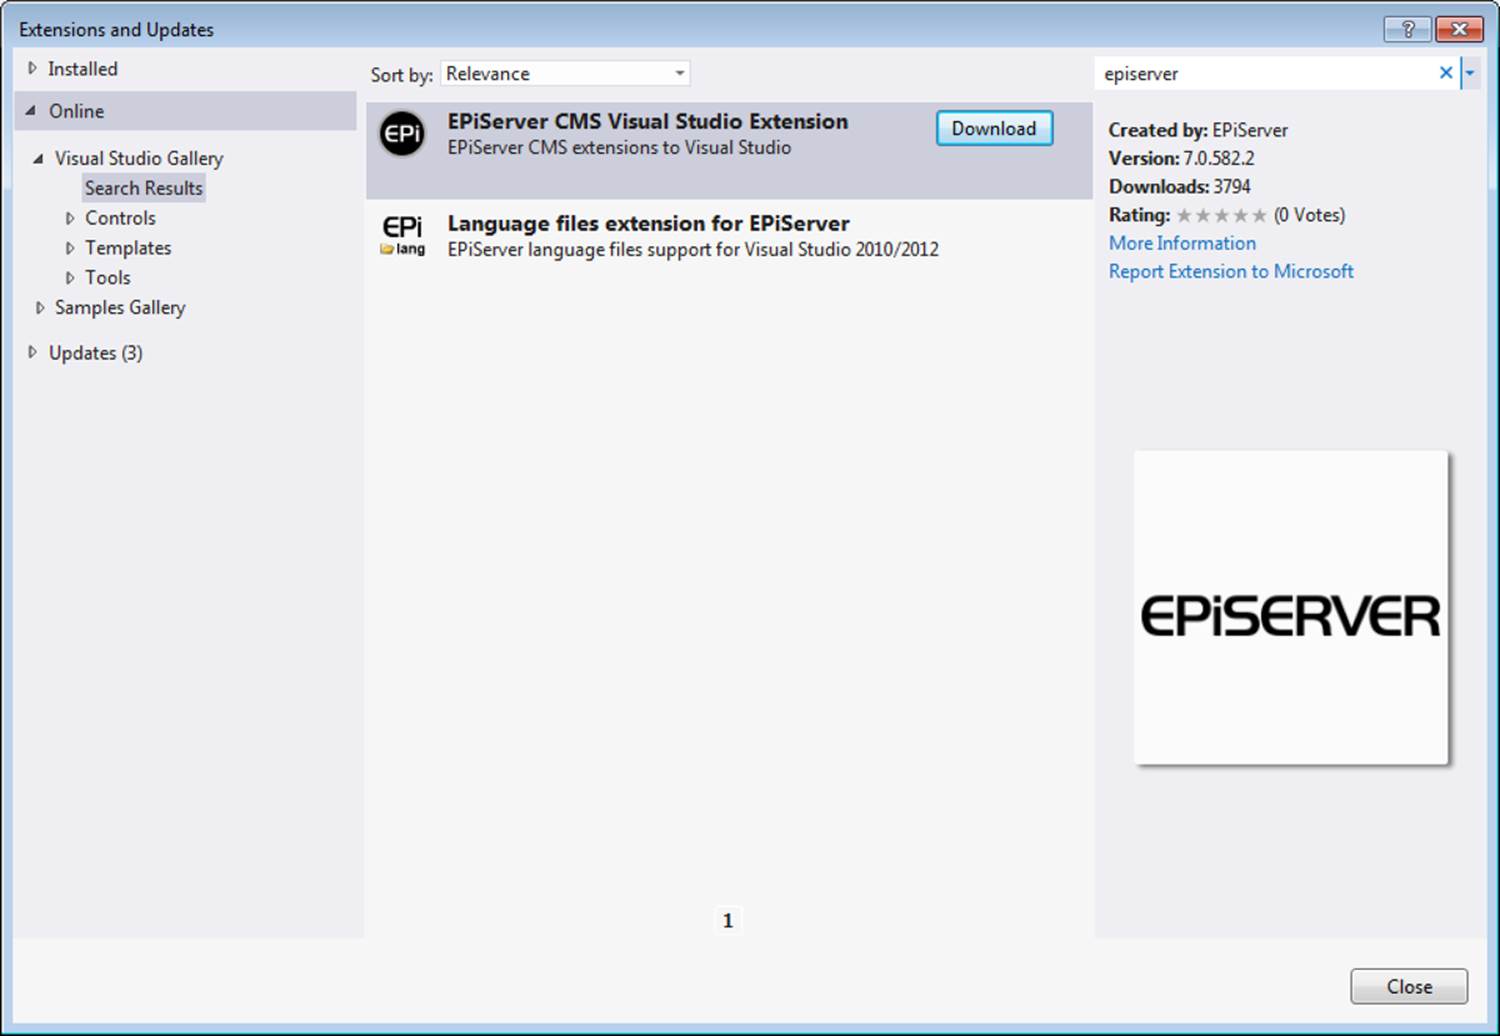 Search result containing EPiServer's Visual Studio integration.